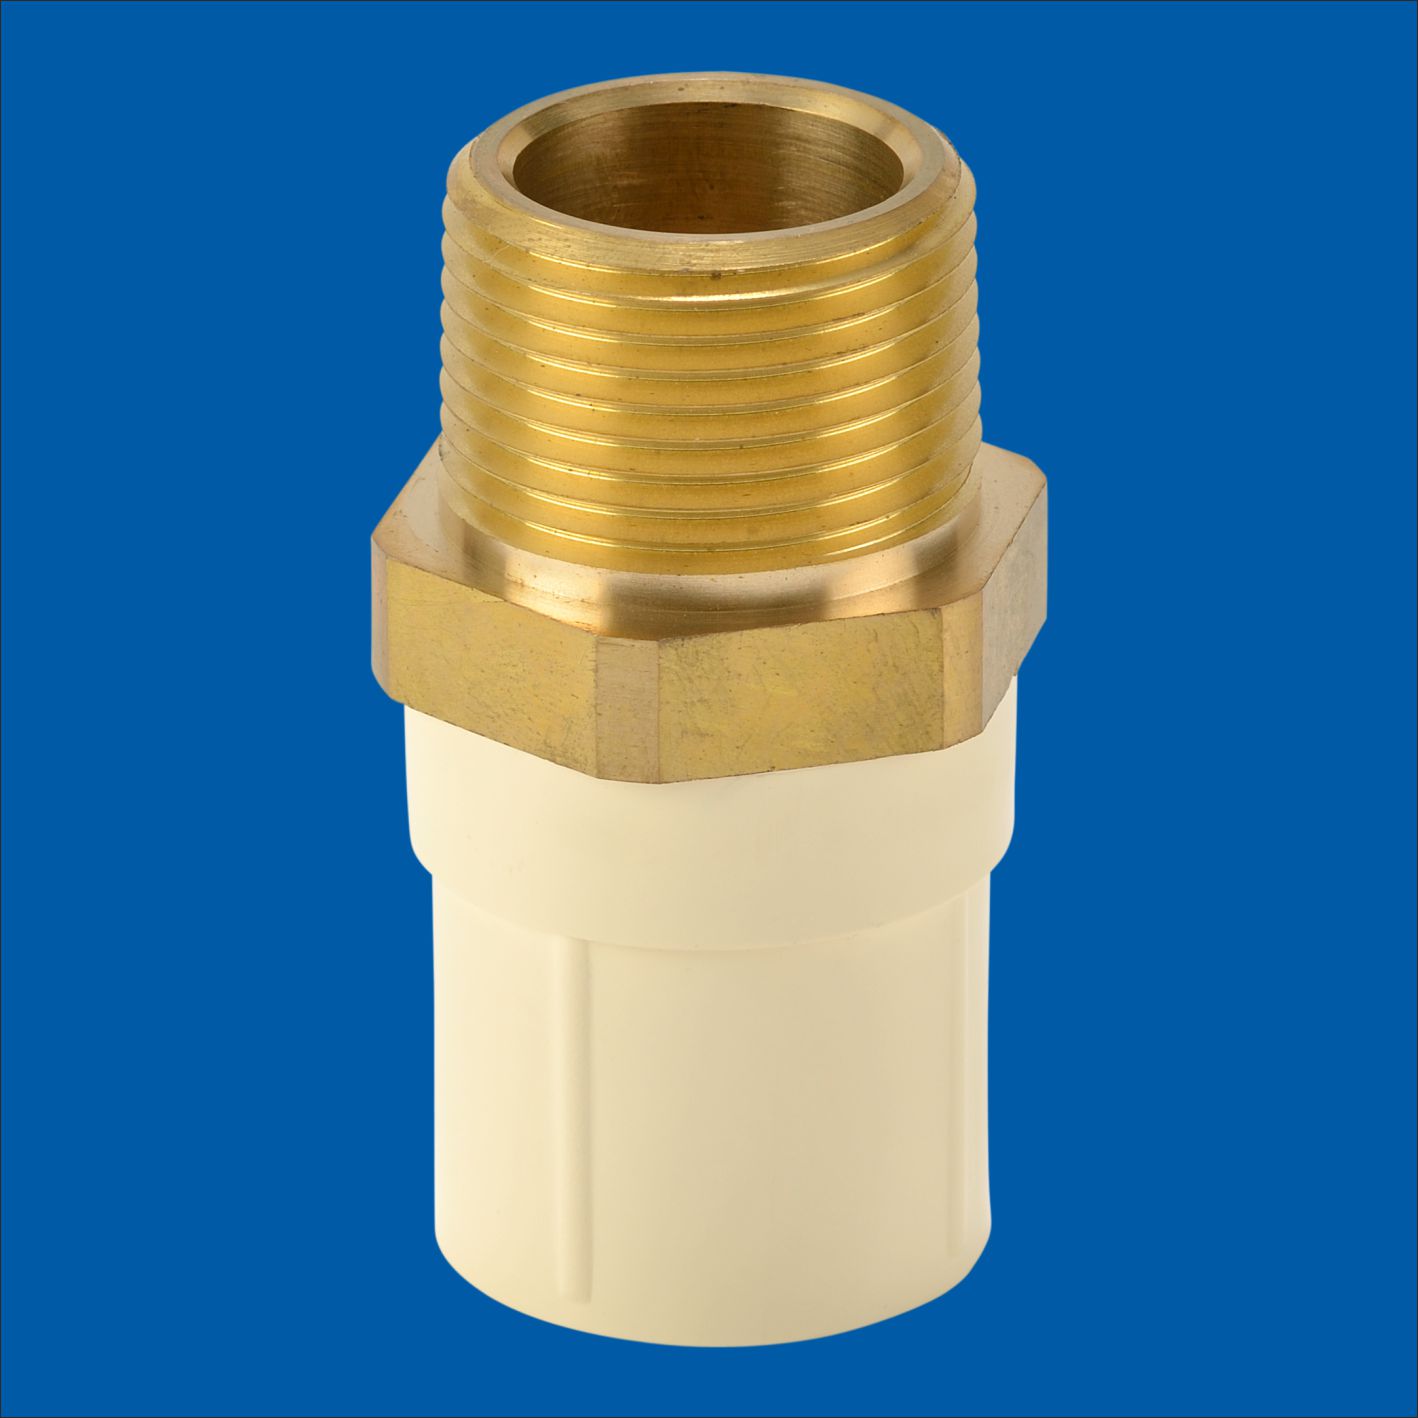 Male Adapter Brass Threads Fittings